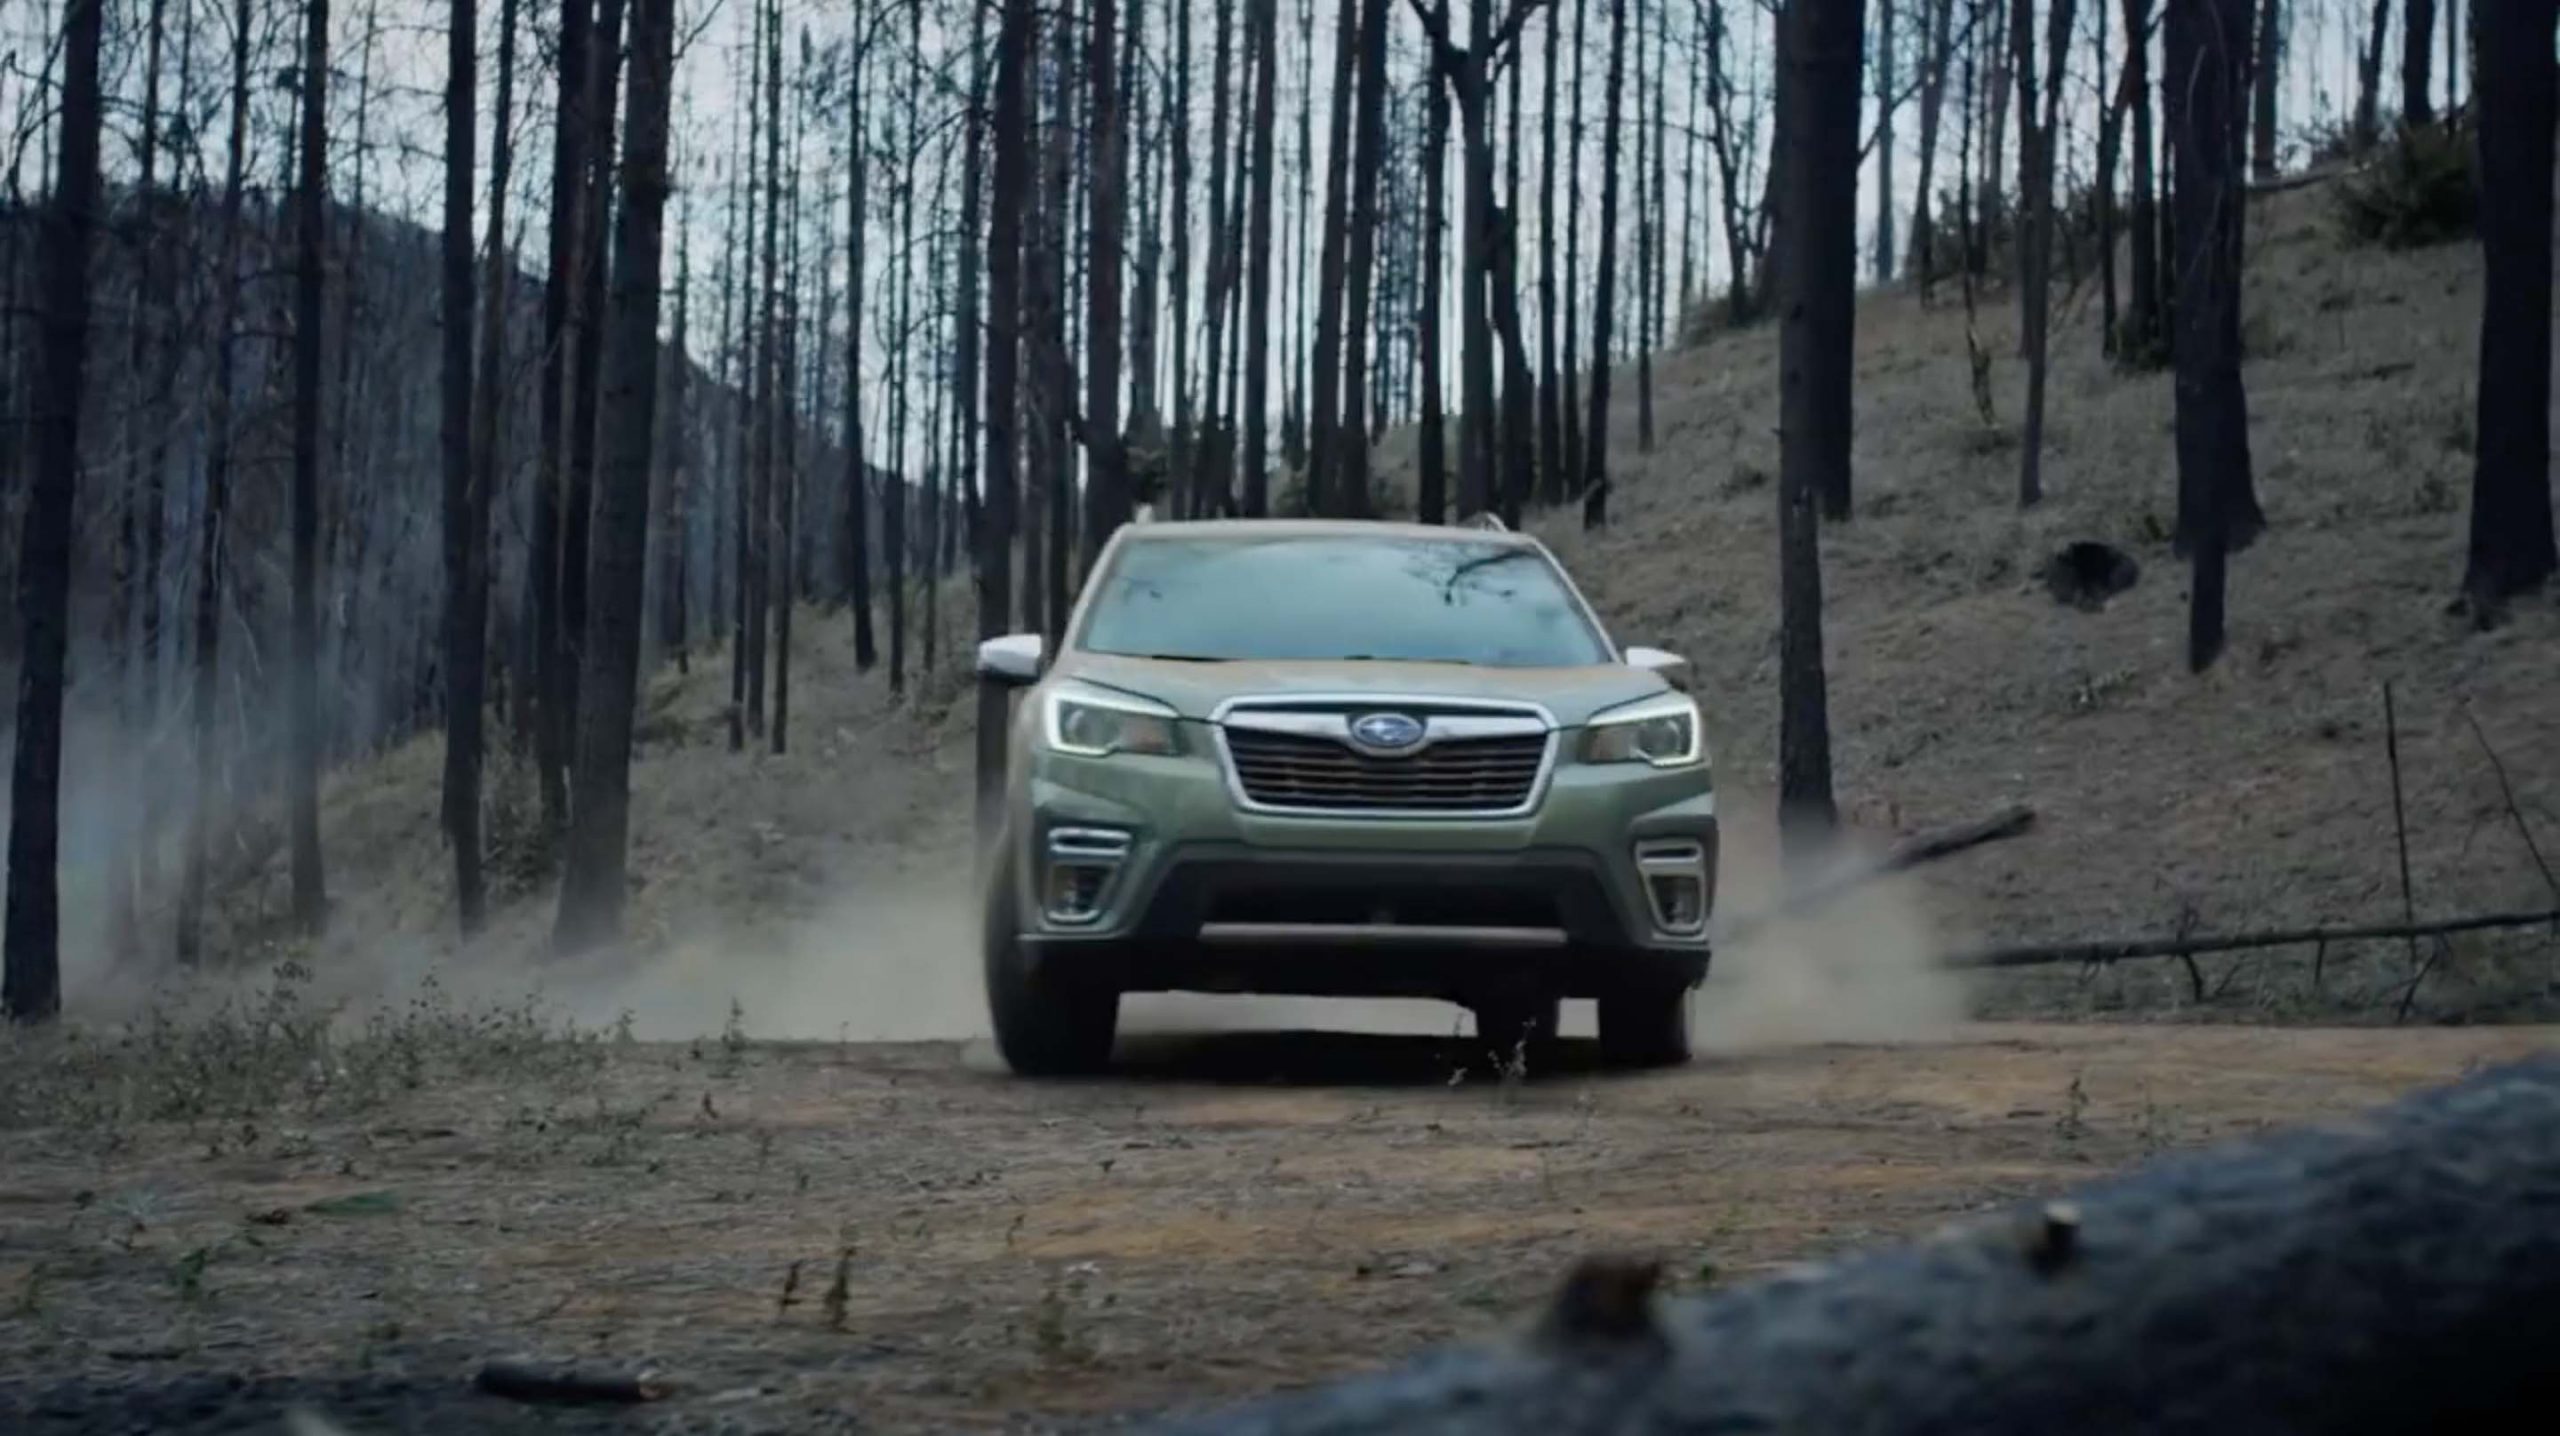 Subaru Documents the Toll Wildfires Have Taken on California in This New Spot for the Forester